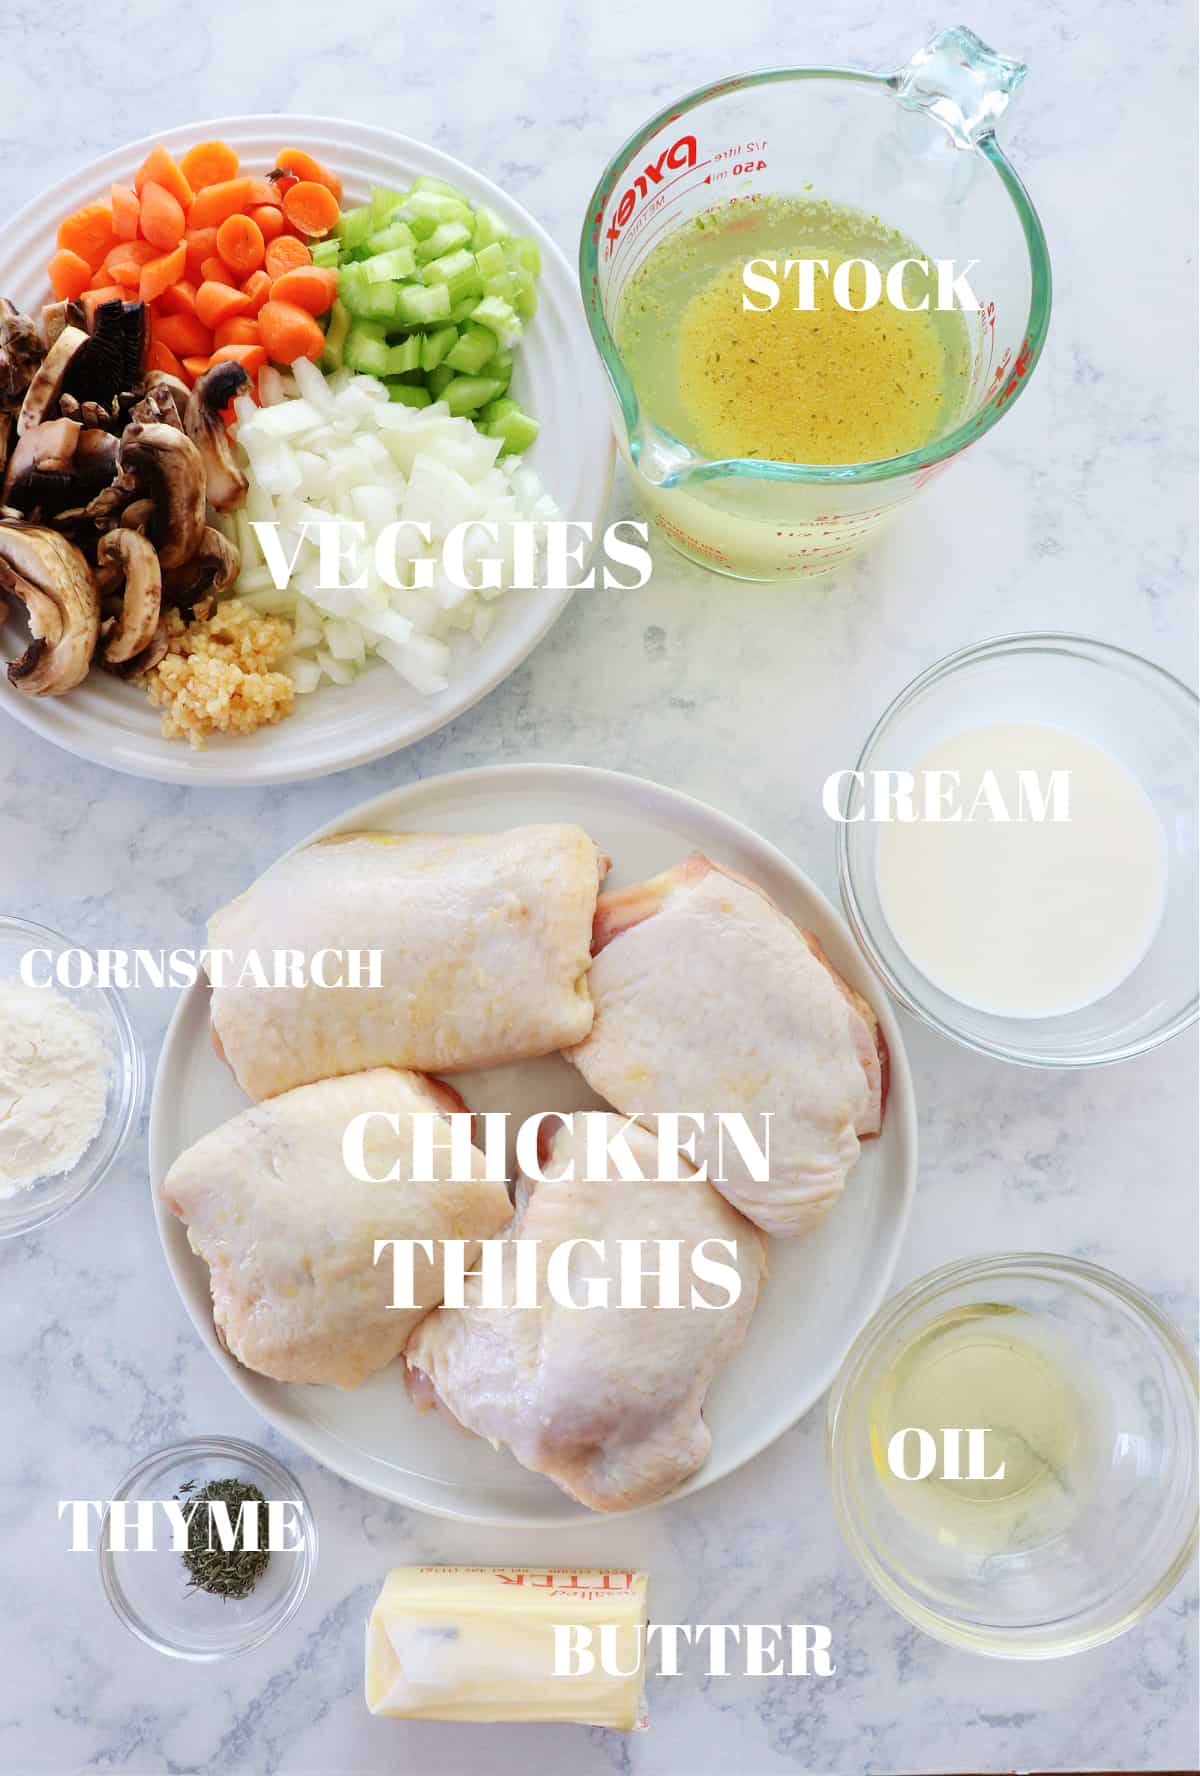 Ingredients for chicken fricassee on a marble board.